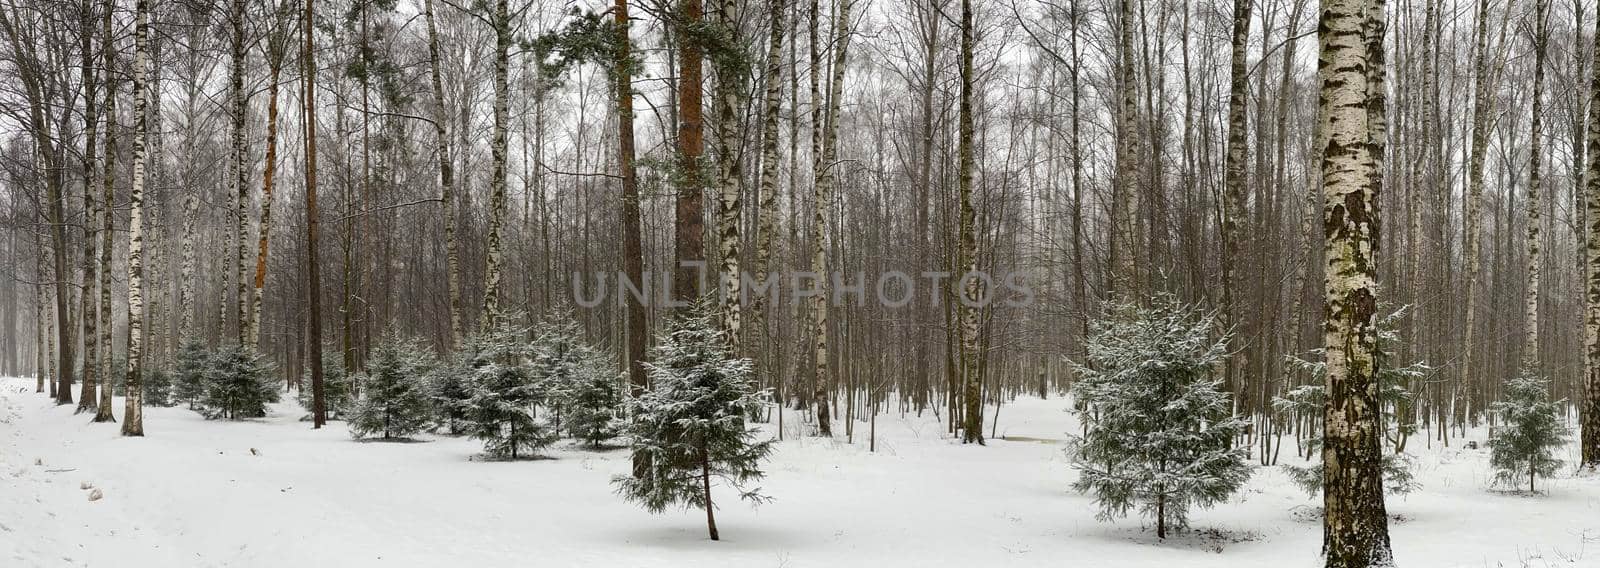 Panoramic image of small fir trees stand in snow-covered park in cloudy weather, needles of a fir tree of green color, The wood without leaves, Black trunks of trees. High quality photo